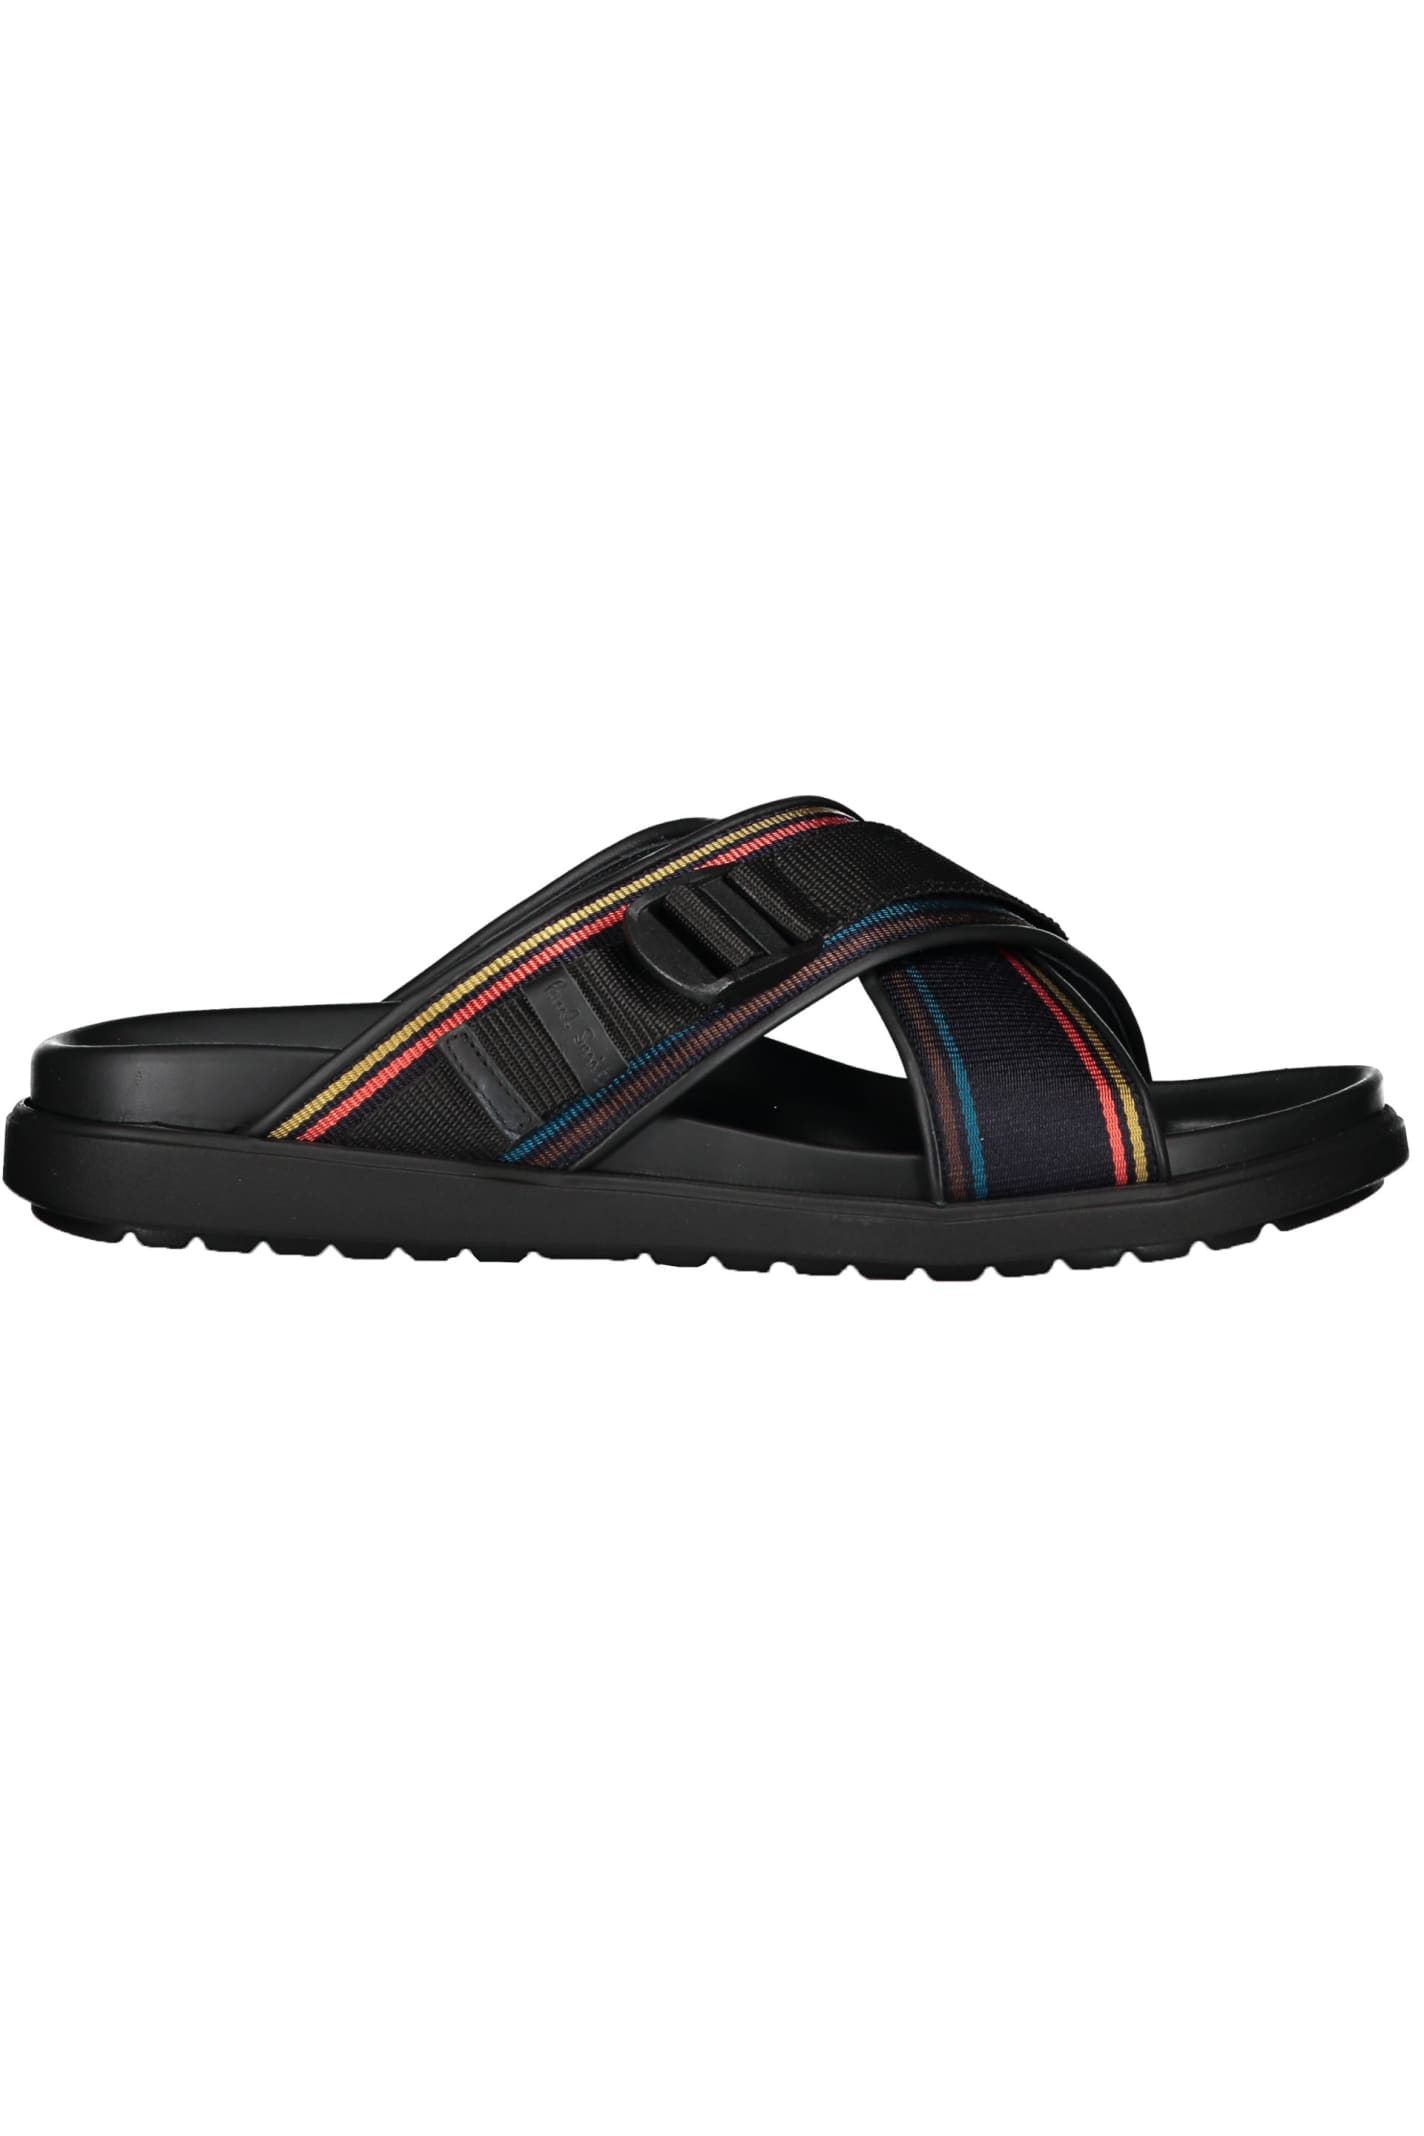 Paul Smith Leather And Fabric Slides In Black